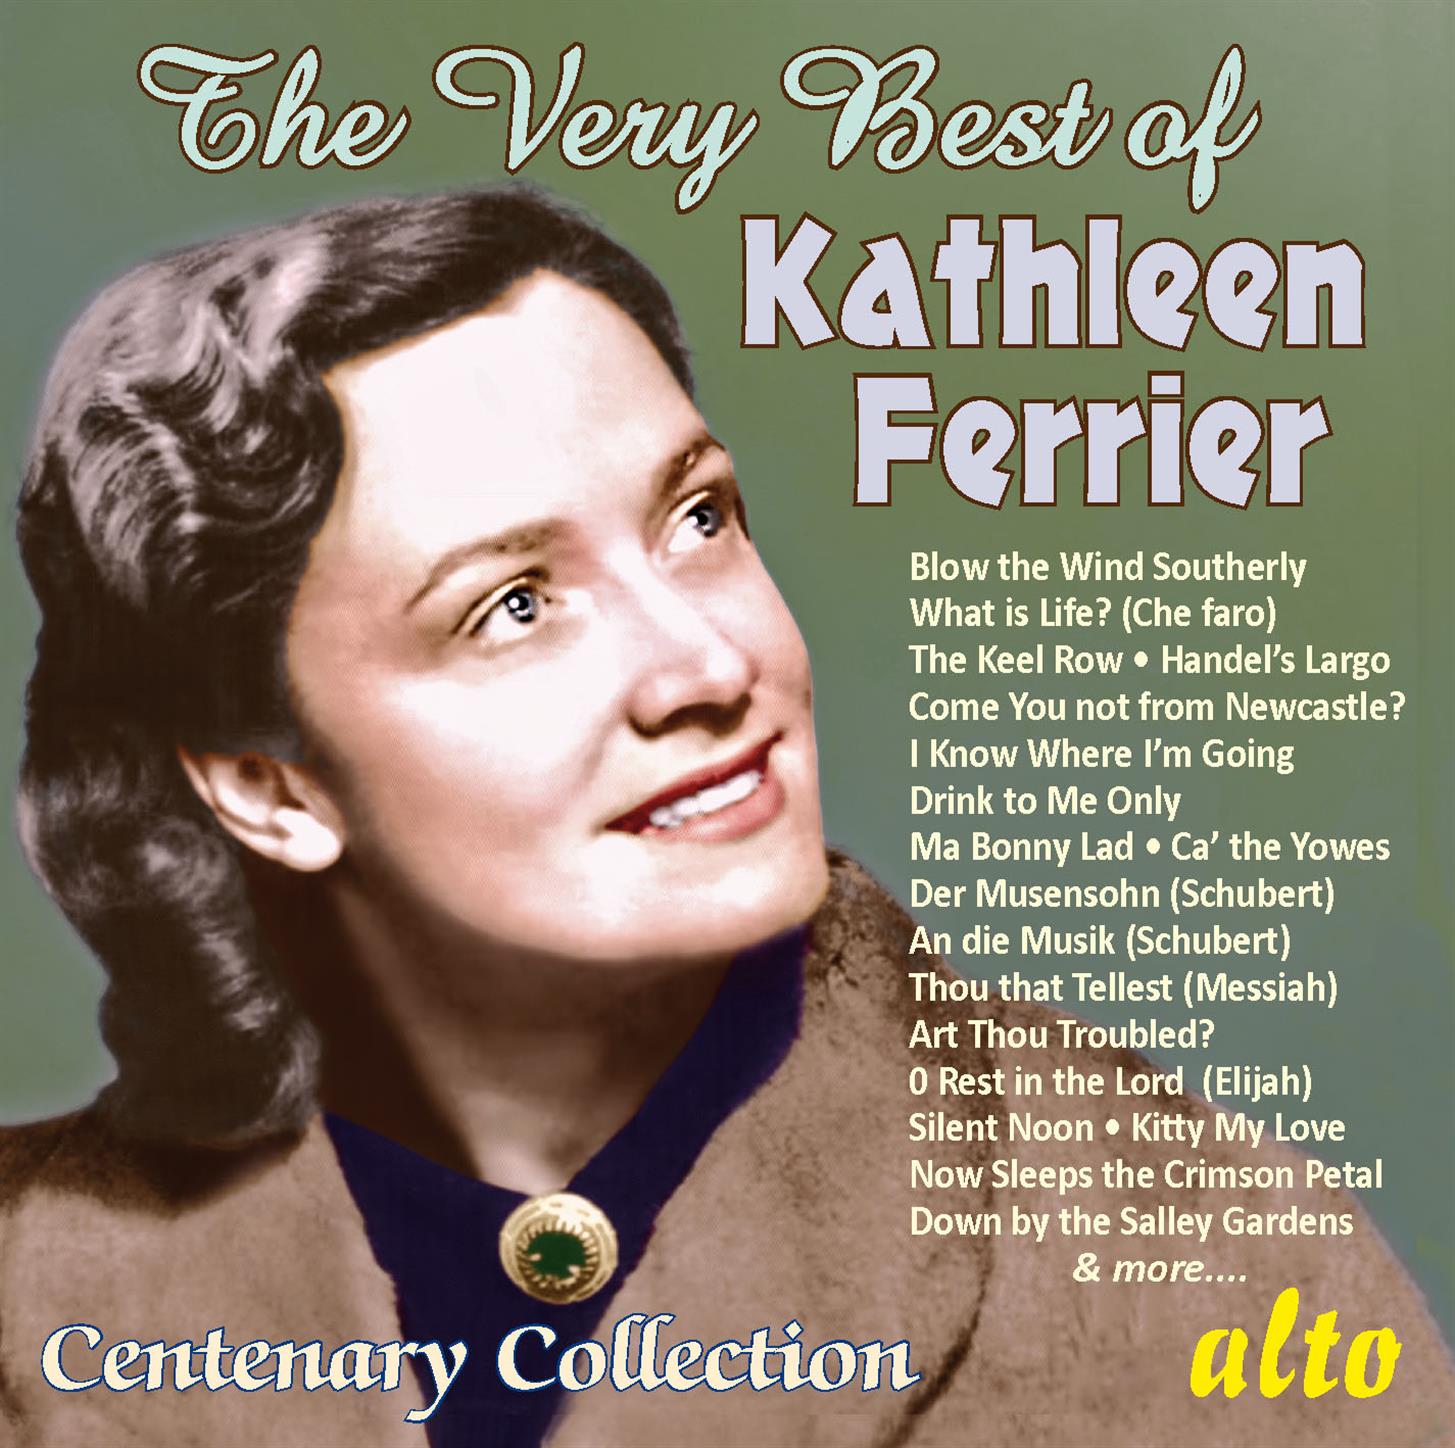 The Very Best of Kathleen Ferrier Centenary Collection